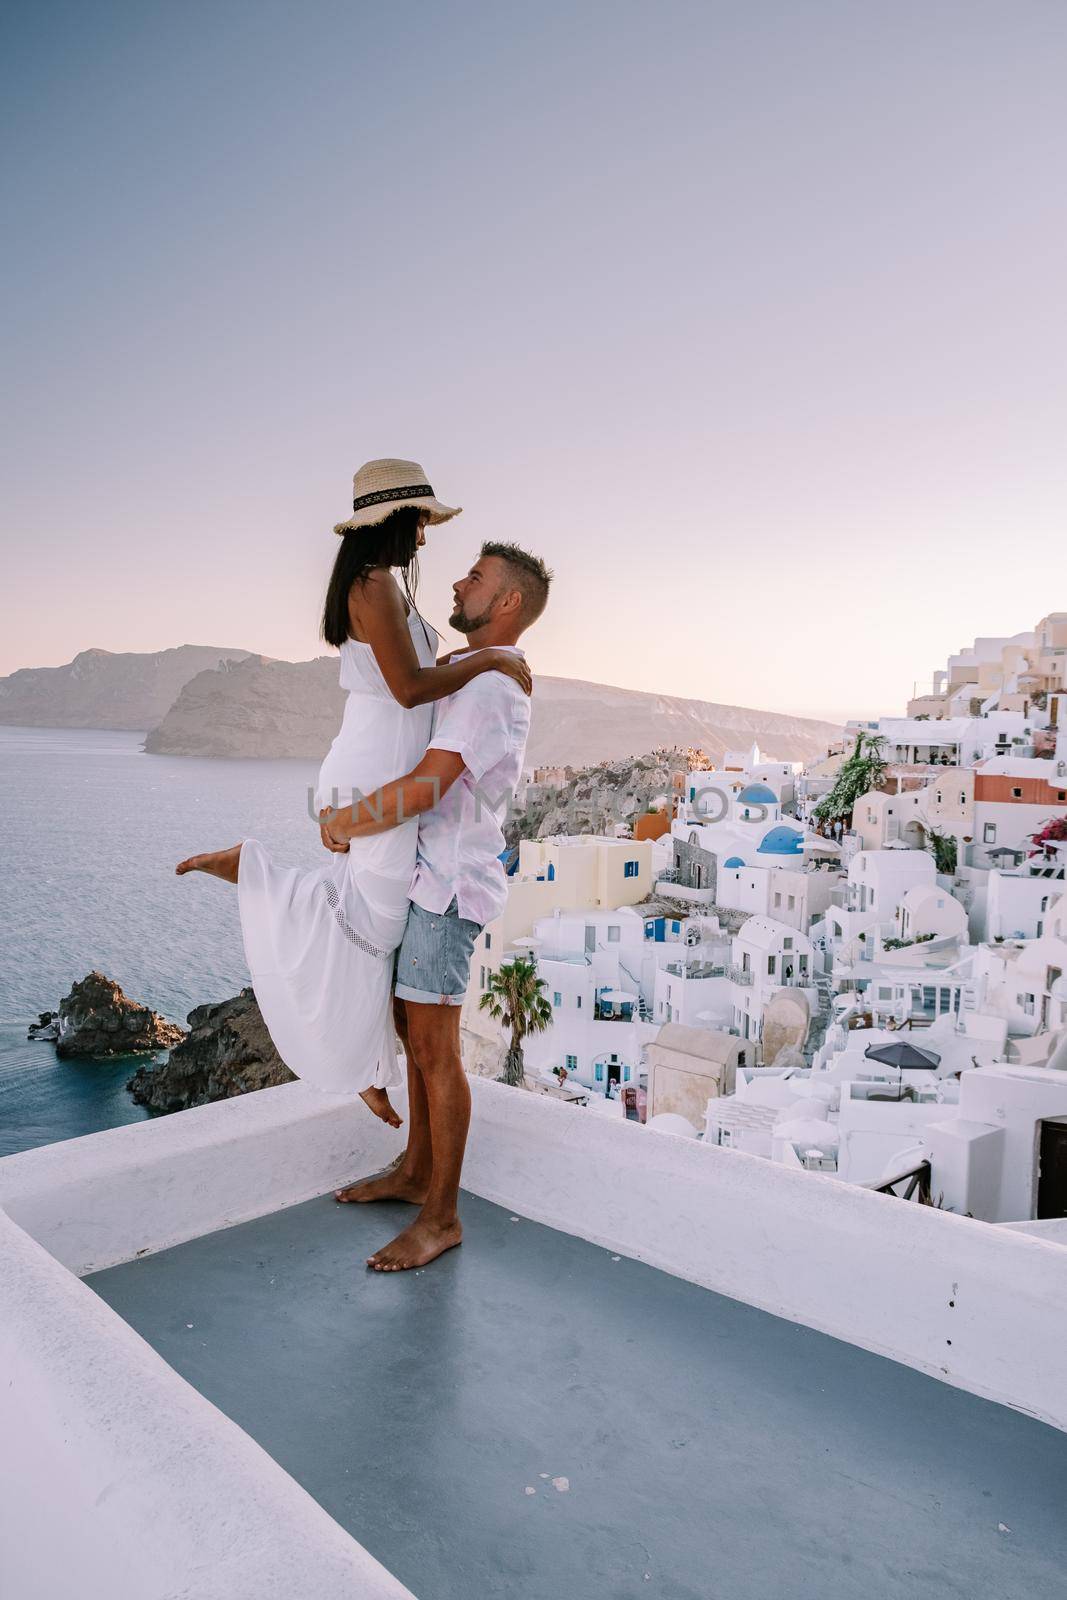 Santorini Greece, young couple on luxury vacation at the Island of Santorini watching sunrise by the blue dome church and whitewashed village of Oia Santorini Greece . Europe